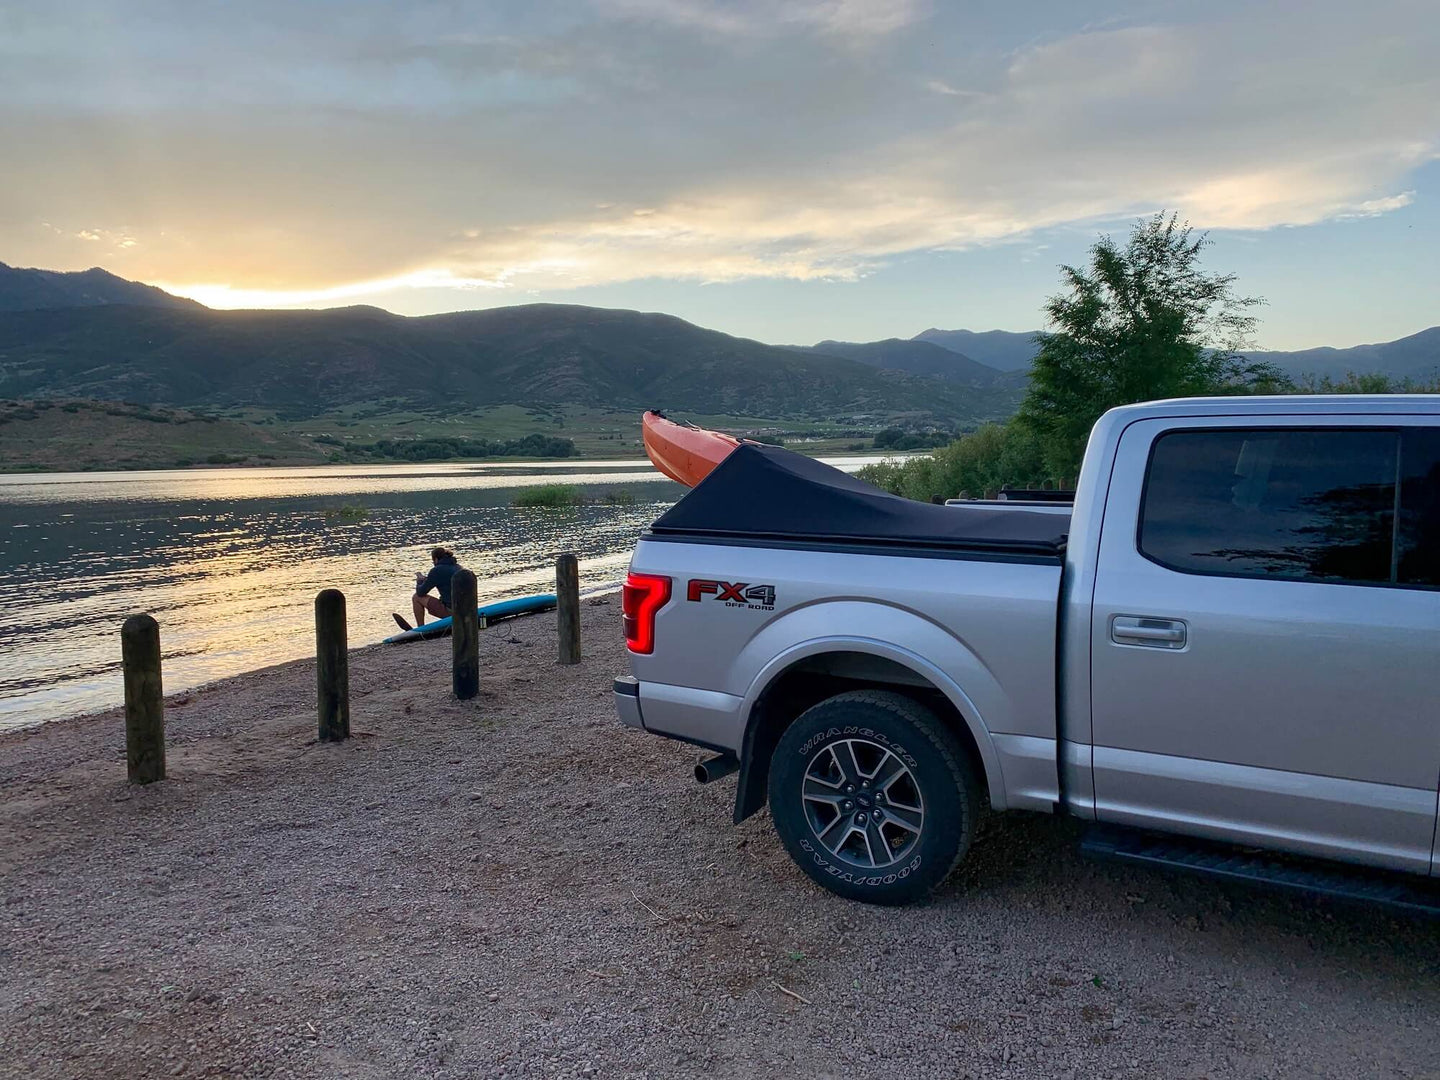 Silver Ford F-150 with Sawtooth Stretch tonneau covering orange kayak in a beautiful mountain lake sunset